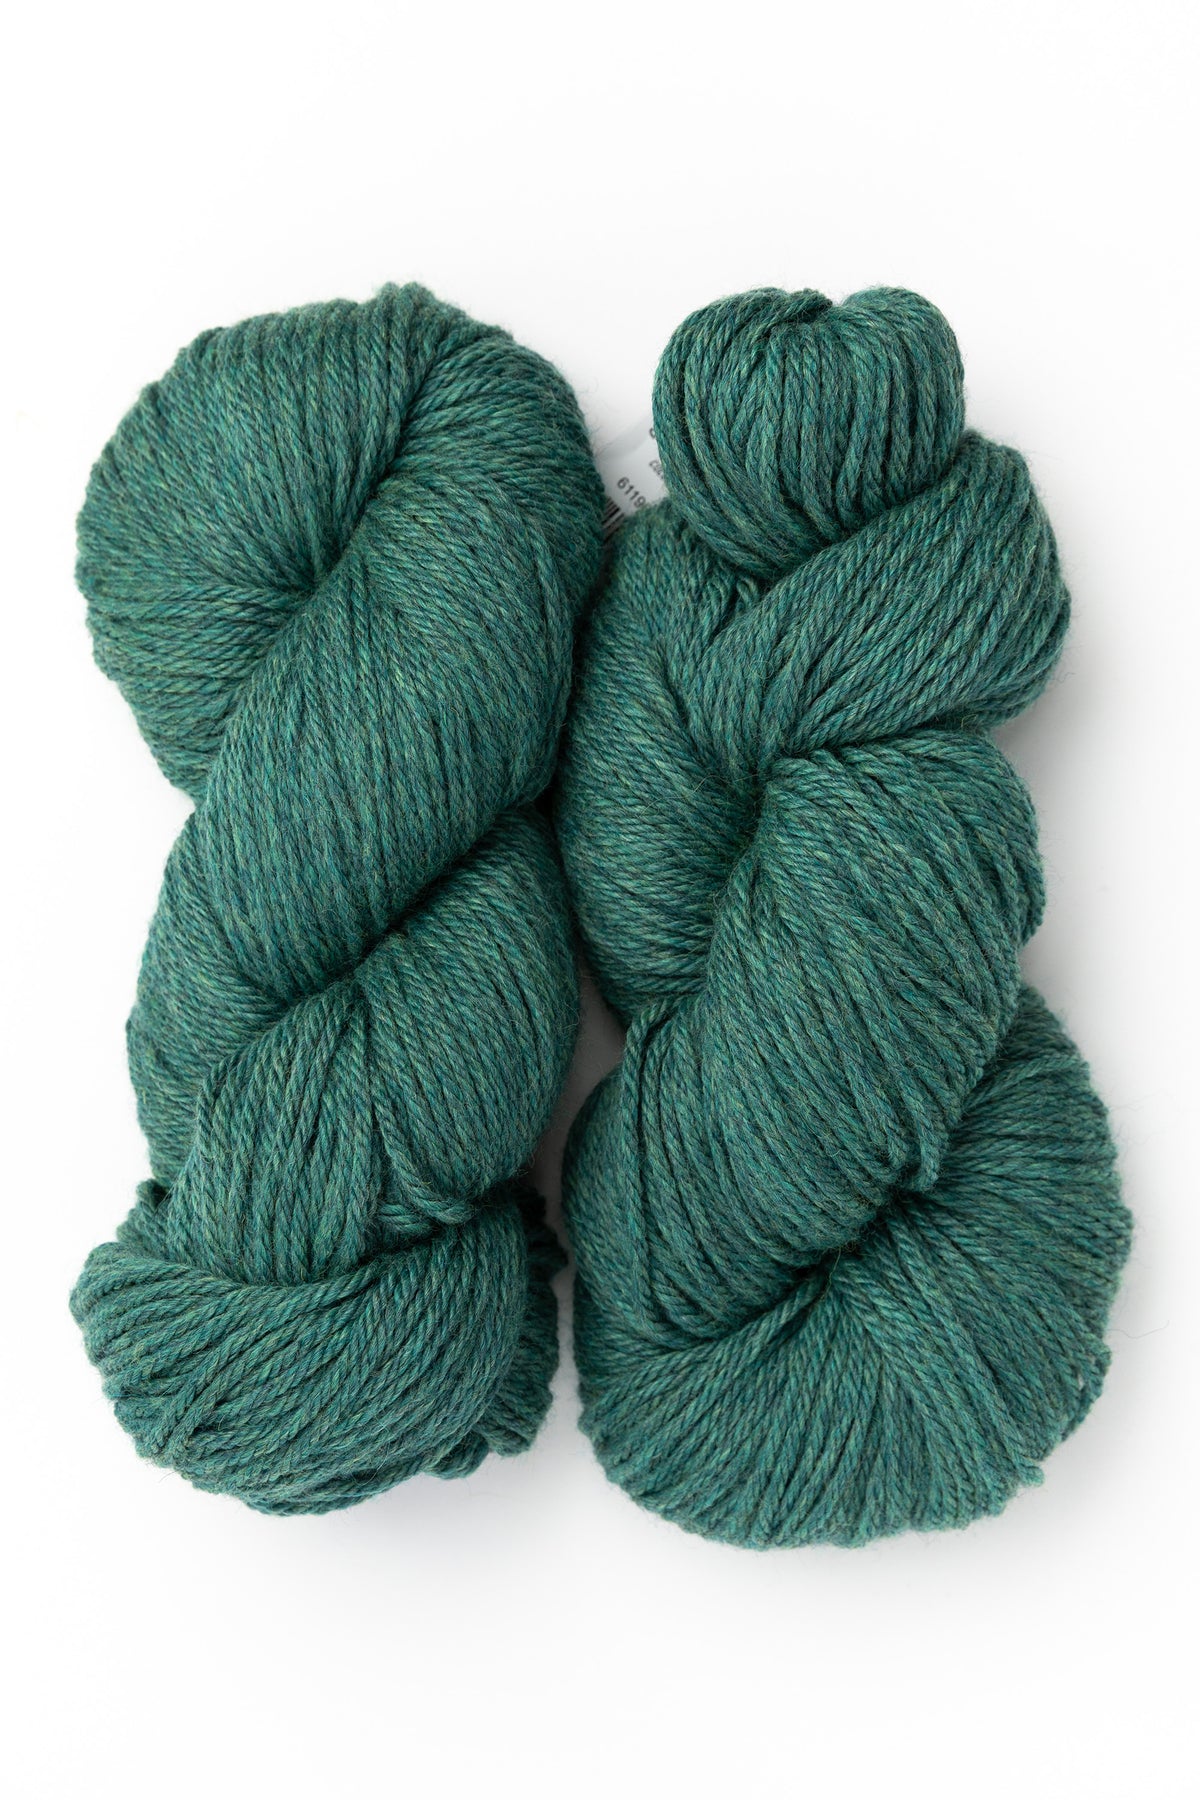 CLEARANCE Discontinued Colours Berroco Vintage & Vintage Chunky